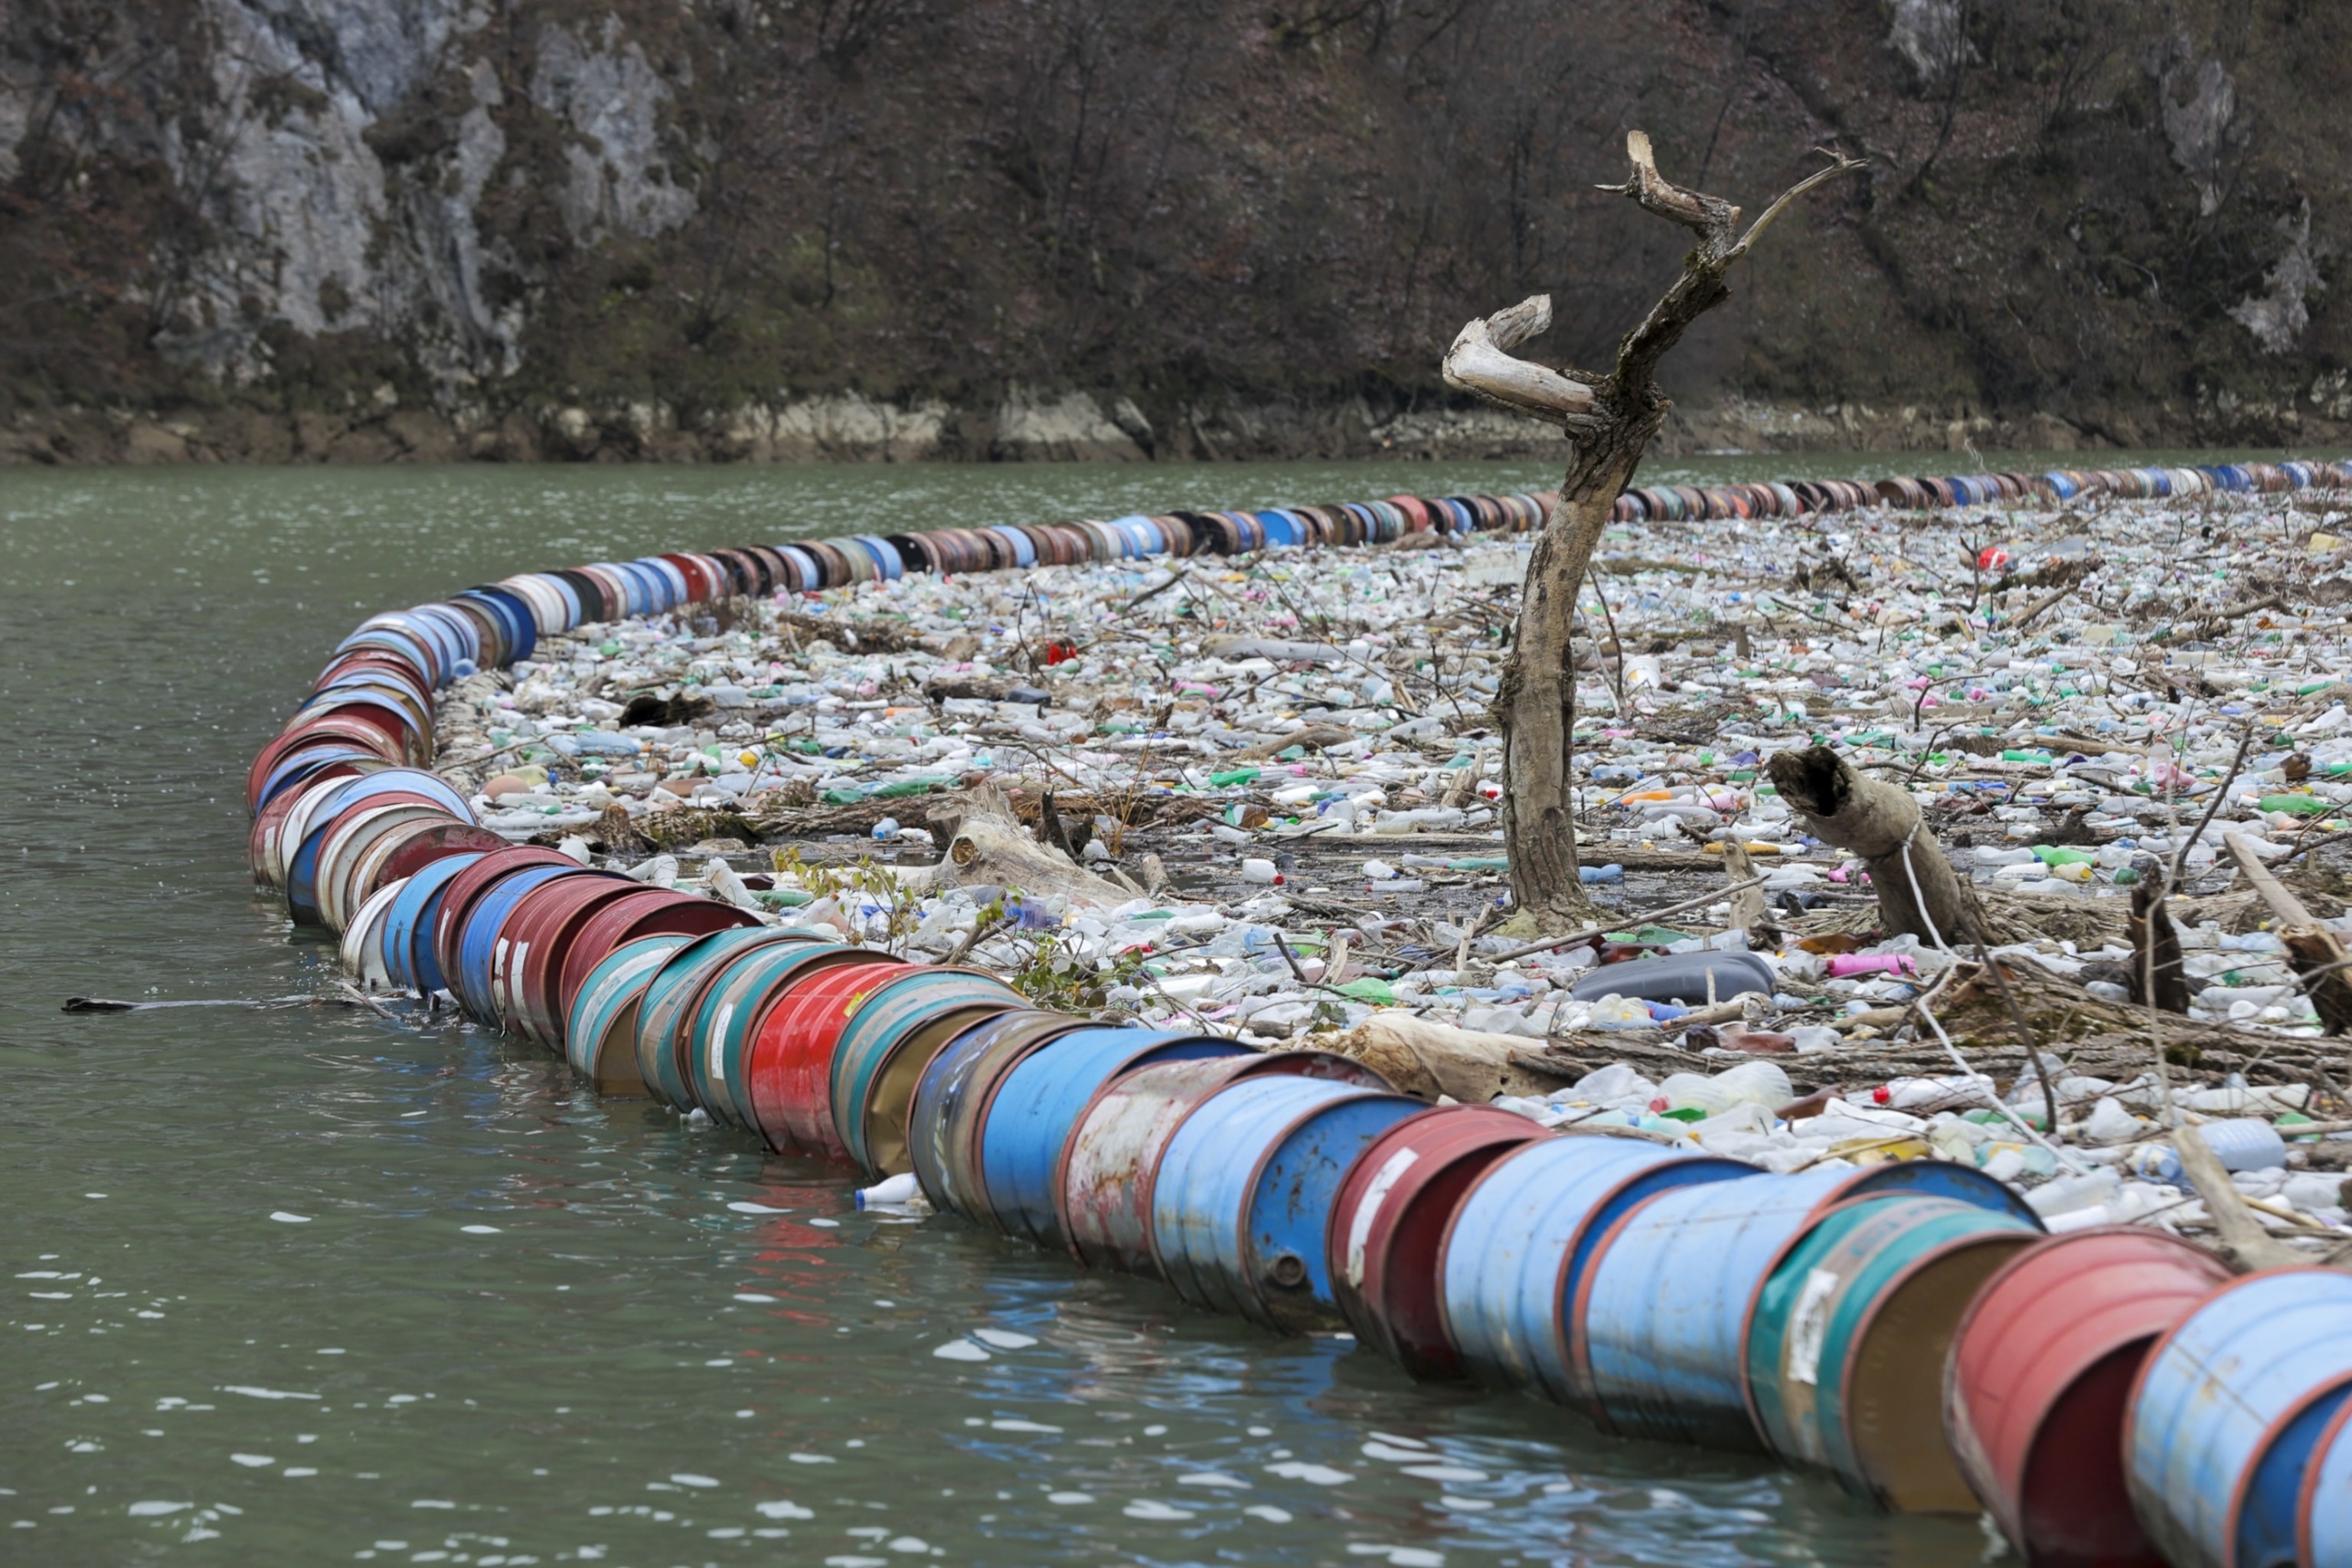 Photo: The surface of the Nadrina River in Bosnia and Herzegovina is covered with garbage and plastic waste